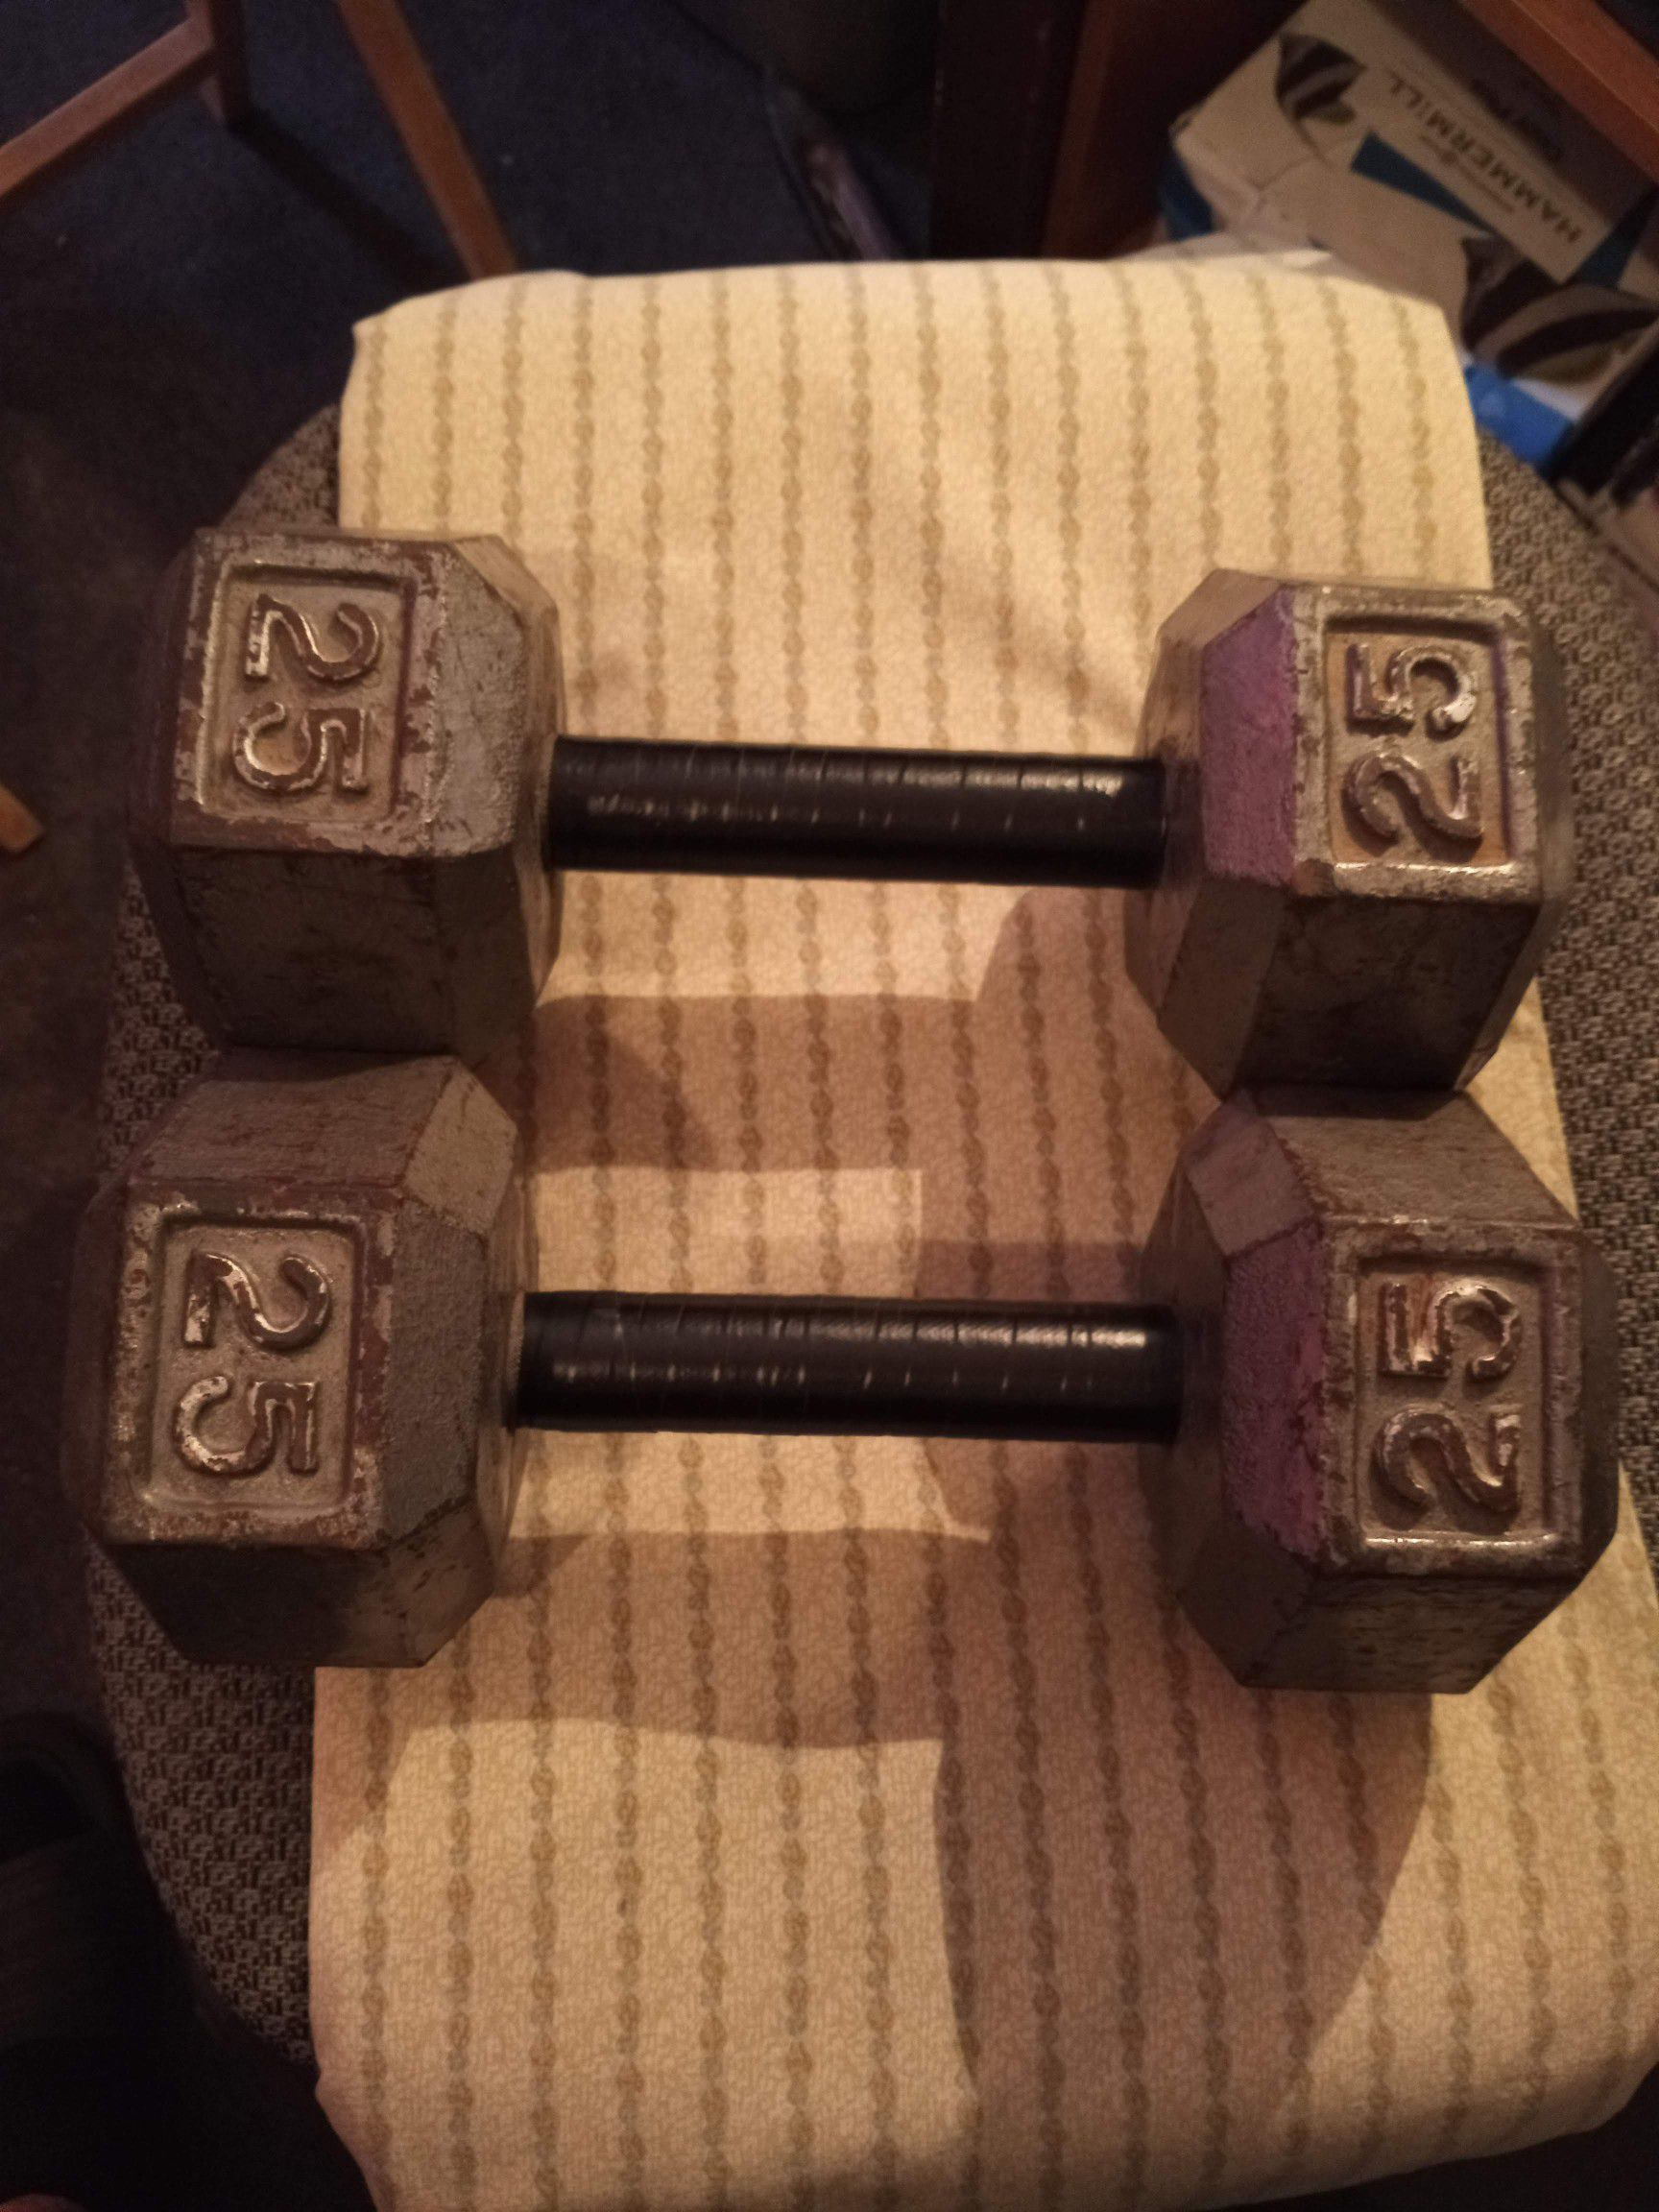 Pair of 25 pound dumbbells